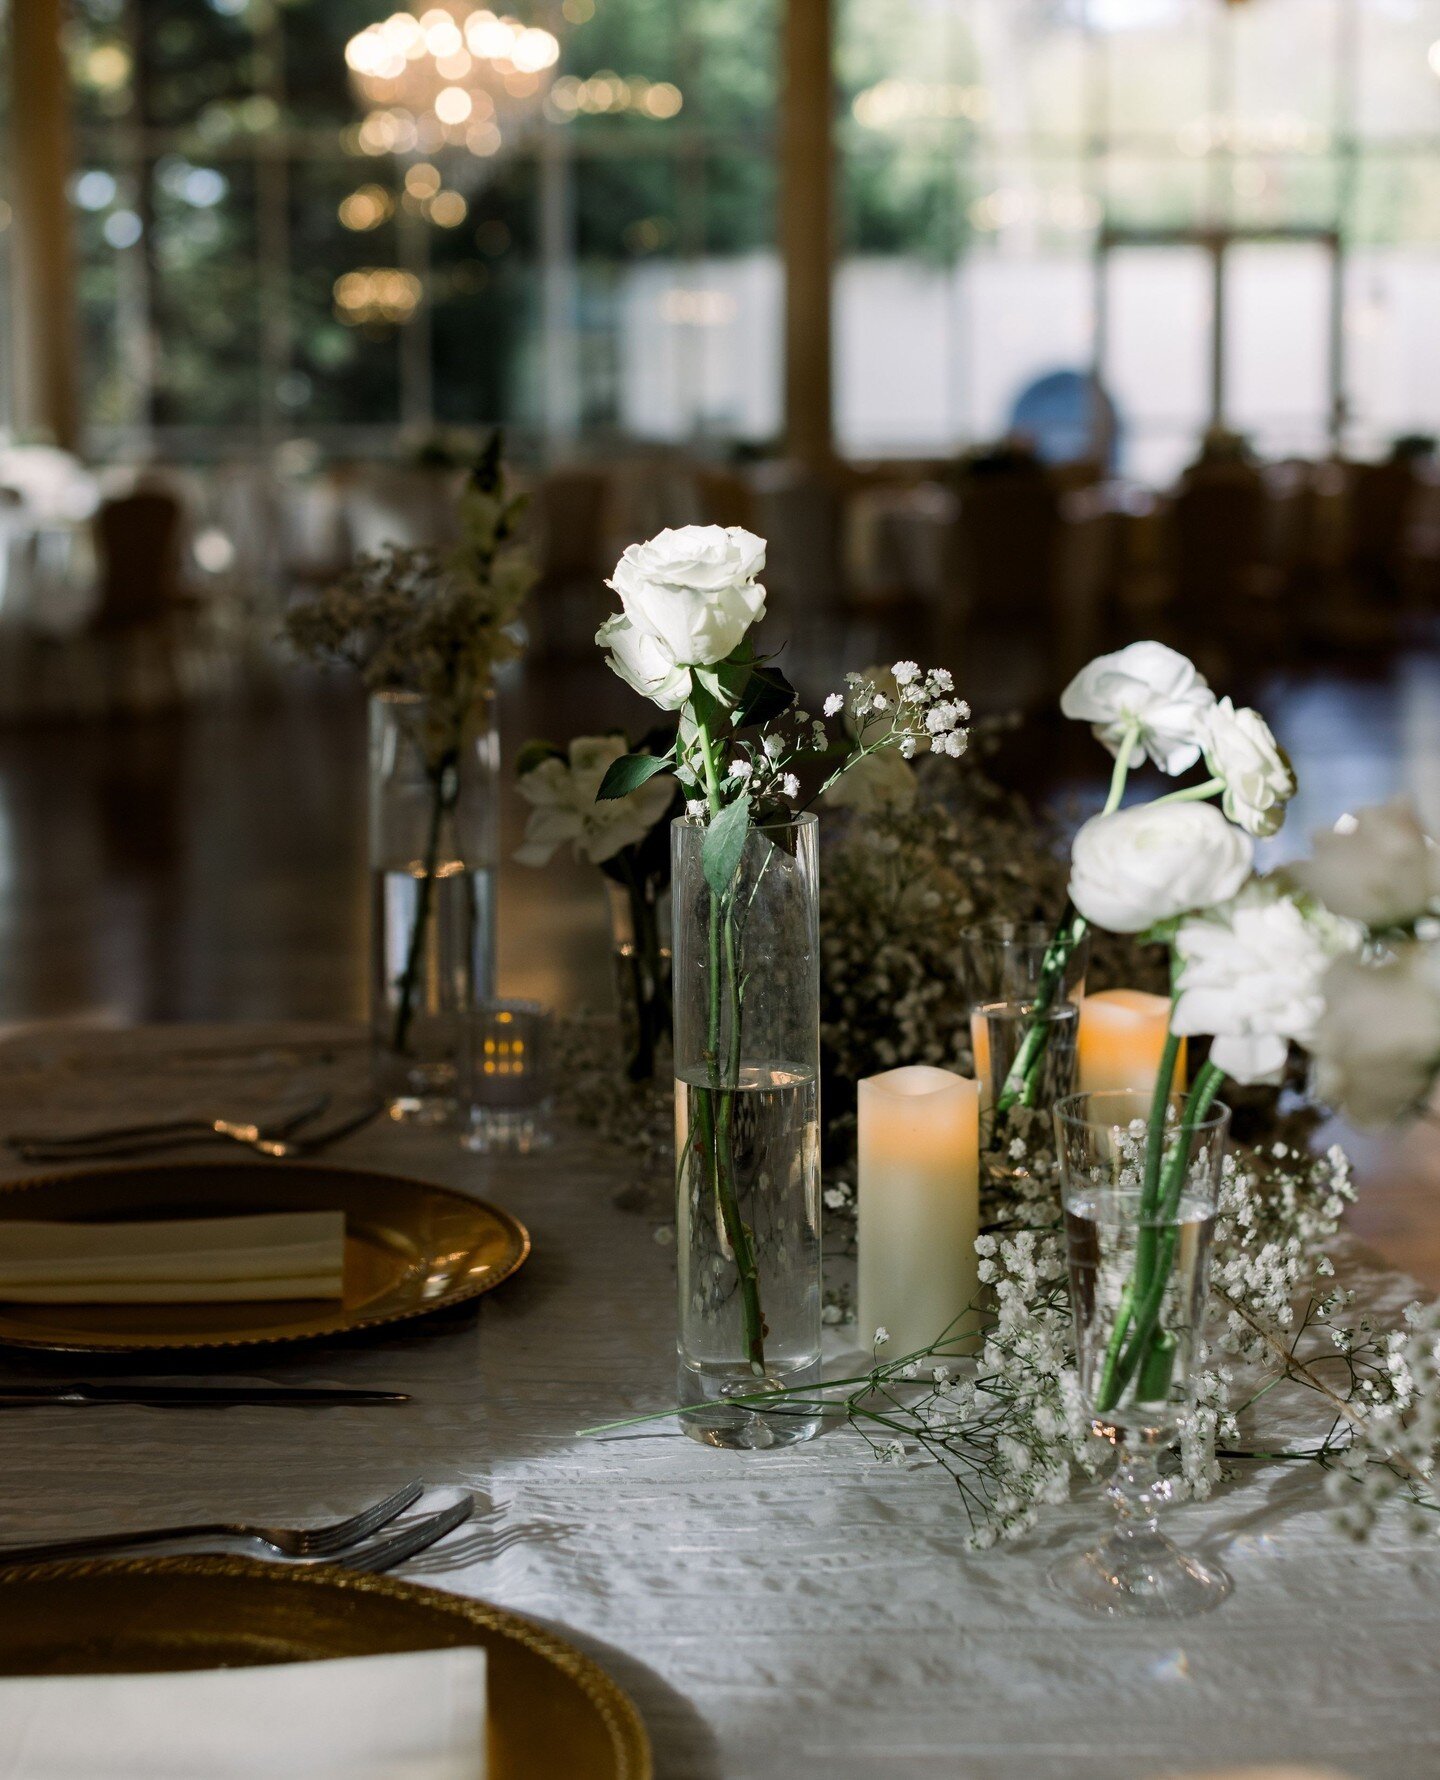 These petite bud vases are perfect for showcasing individual blooms or small floral arrangements, adding a subtle yet enchanting ambiance to your celebration.⁠
⁠
Venue @ashtongardensdallas⁠
Photography @emilychappellproductions⁠
⁠
#weddingflorist #we